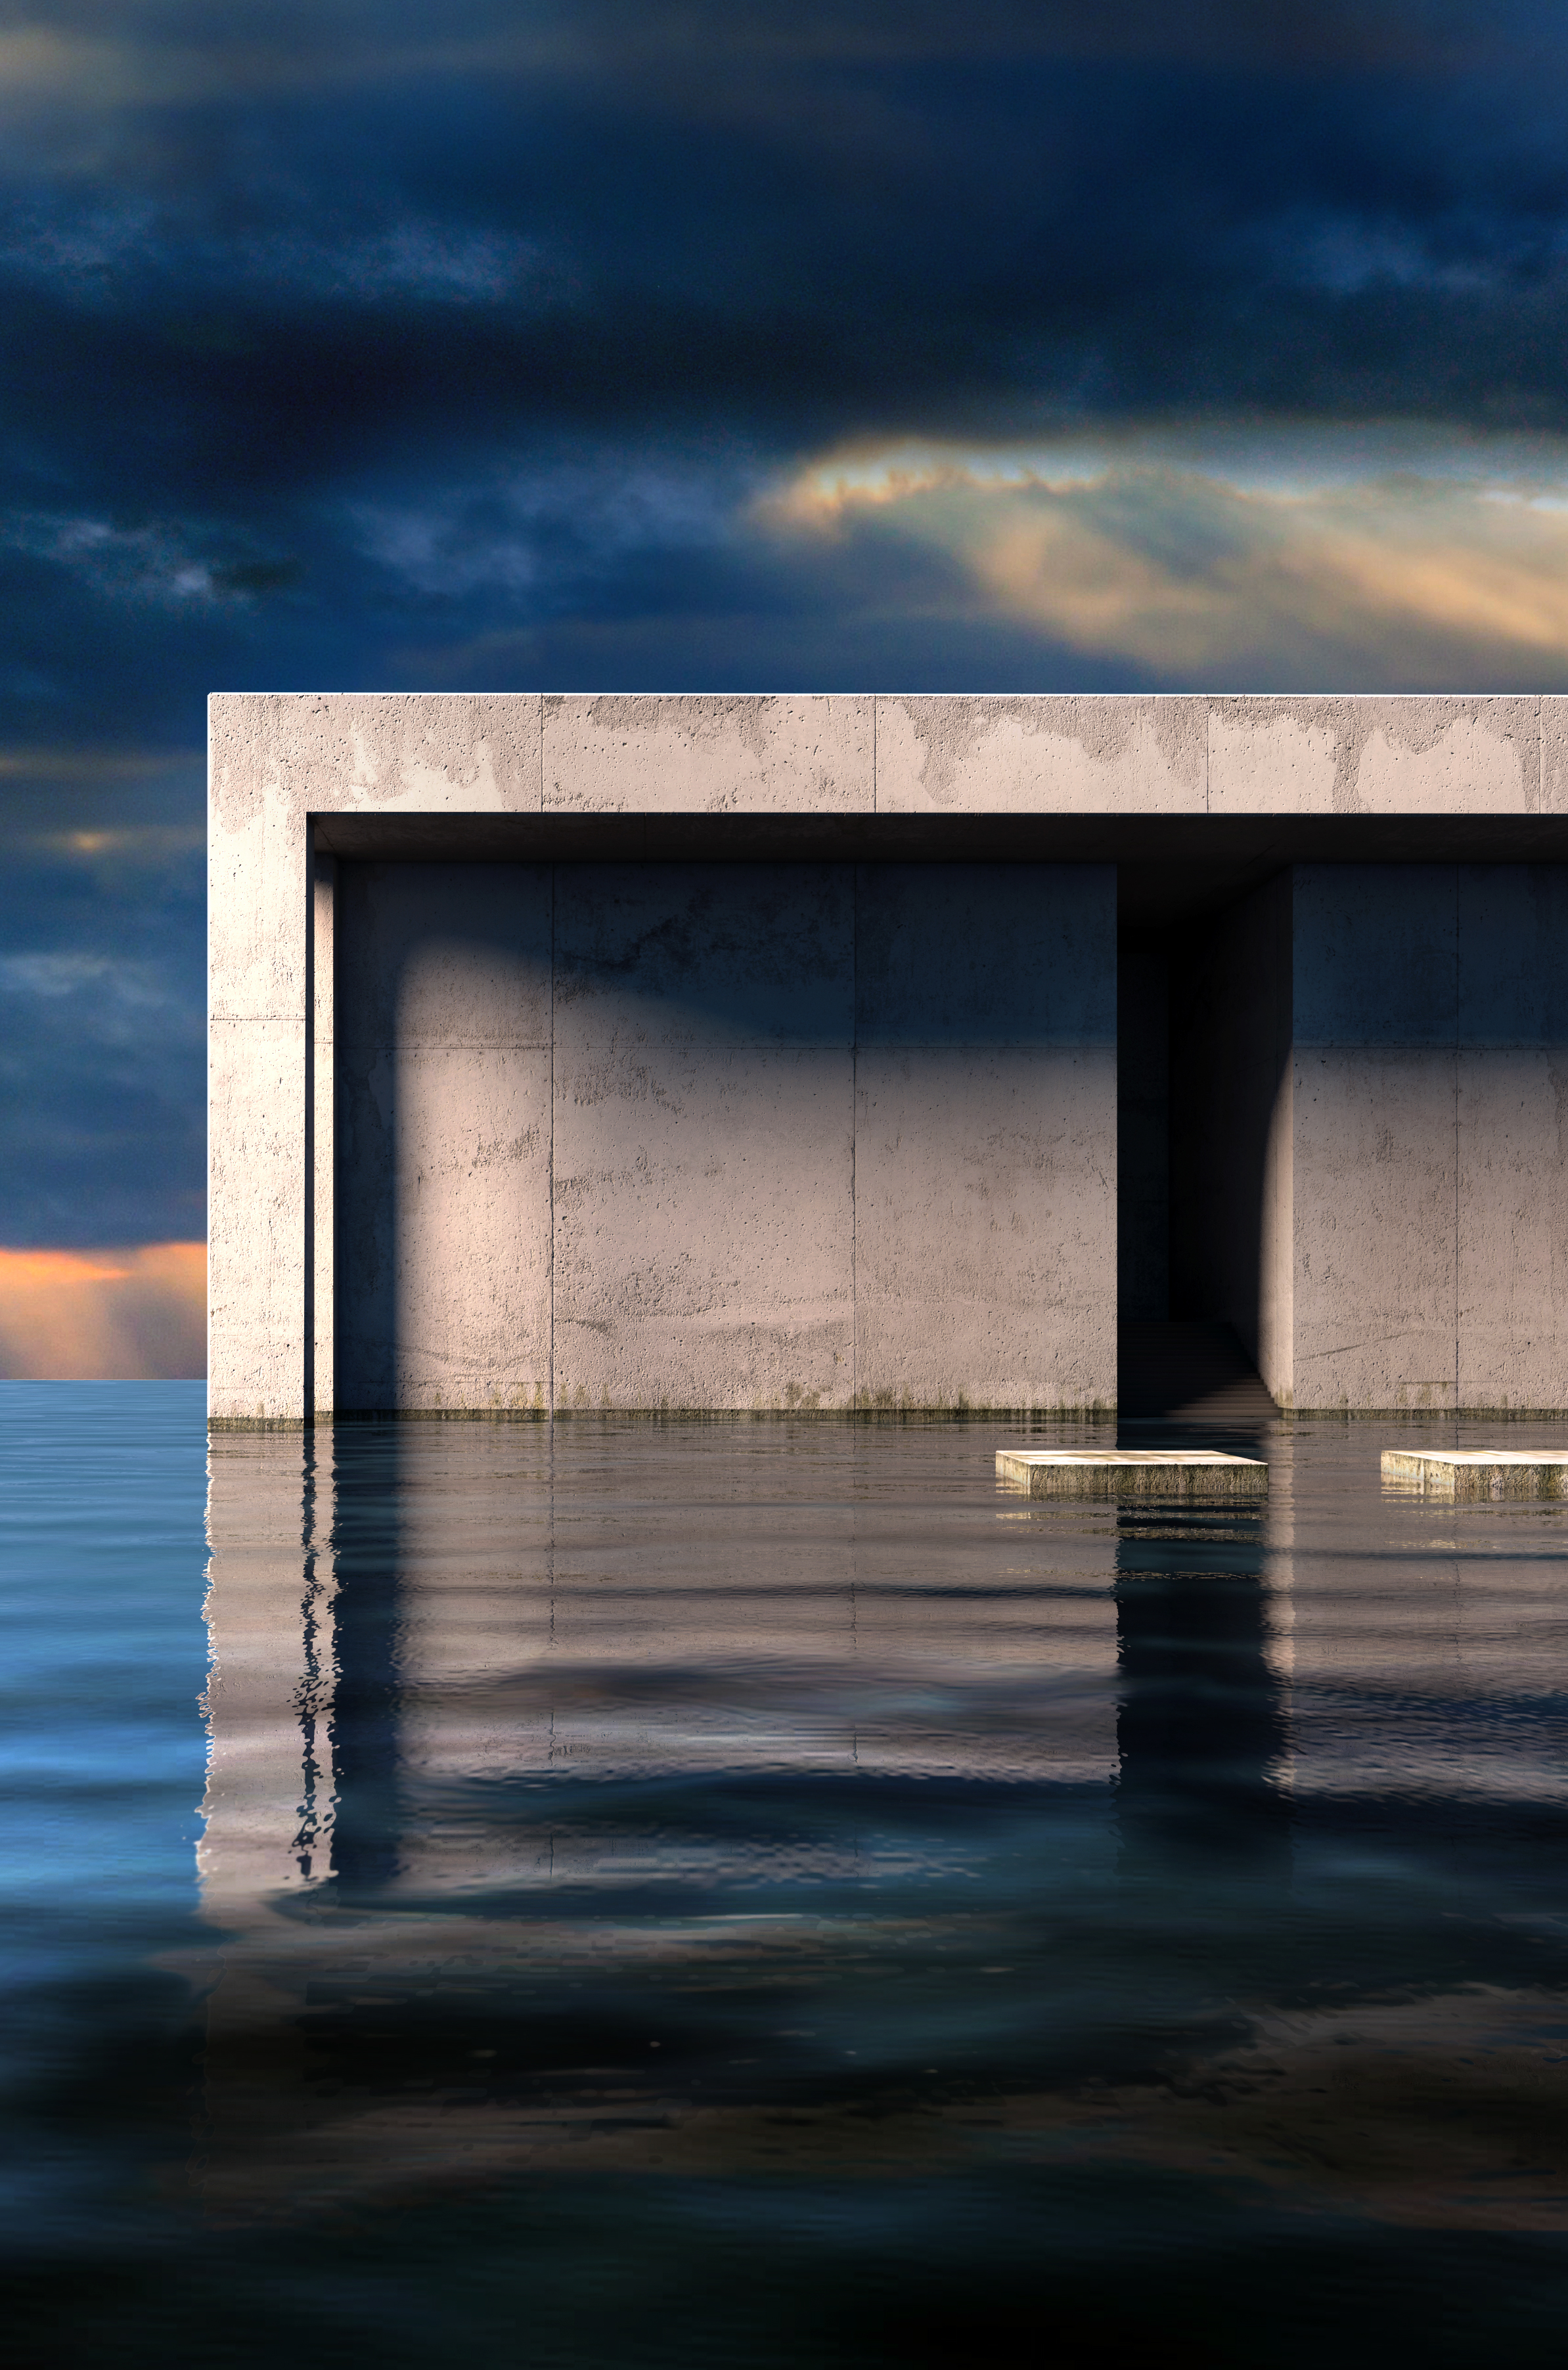 Infinity pool render by YMAGES. Architect visualization and design.